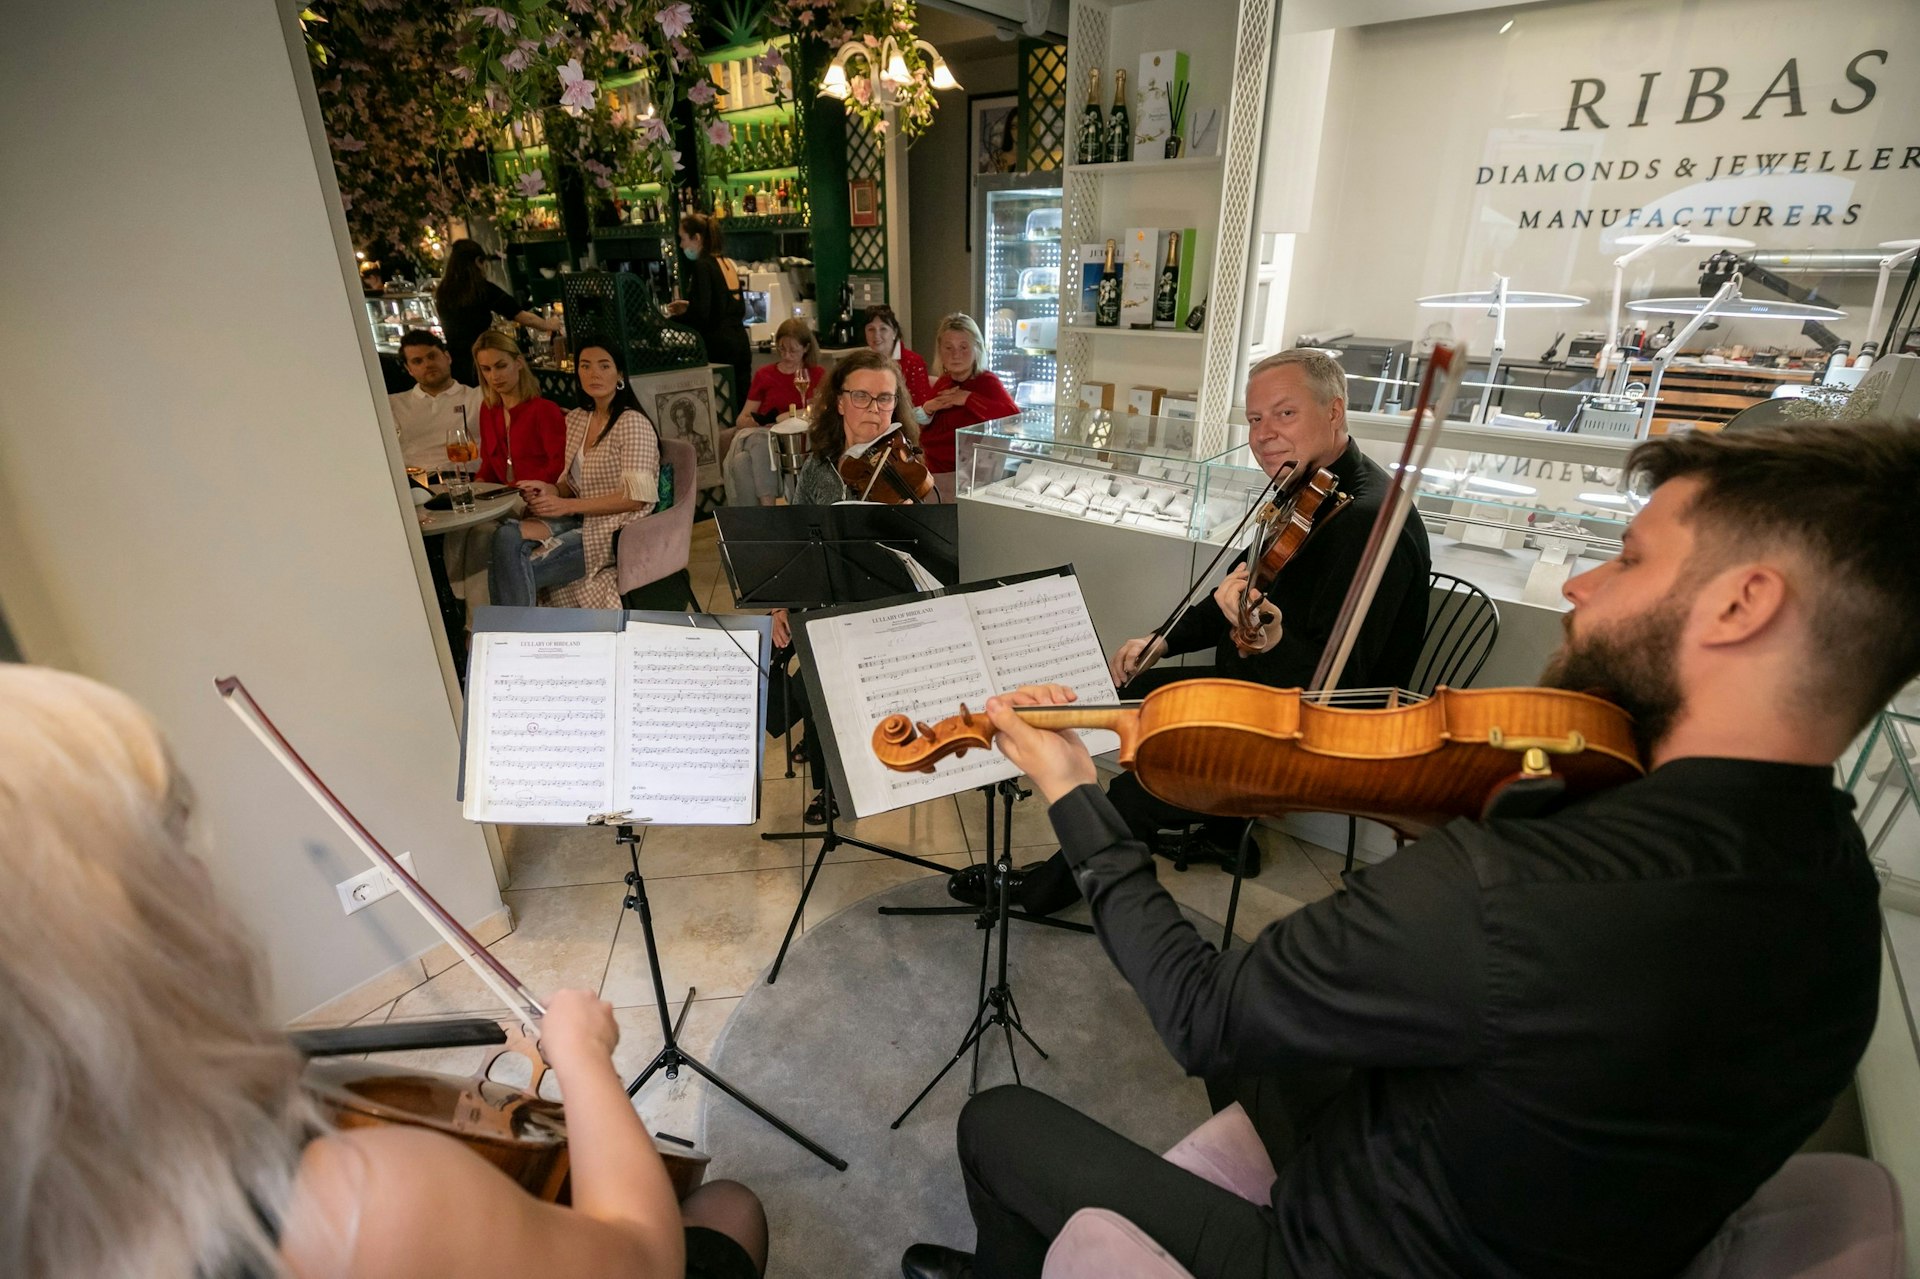 Musicians in Vilnius giving a performance to people